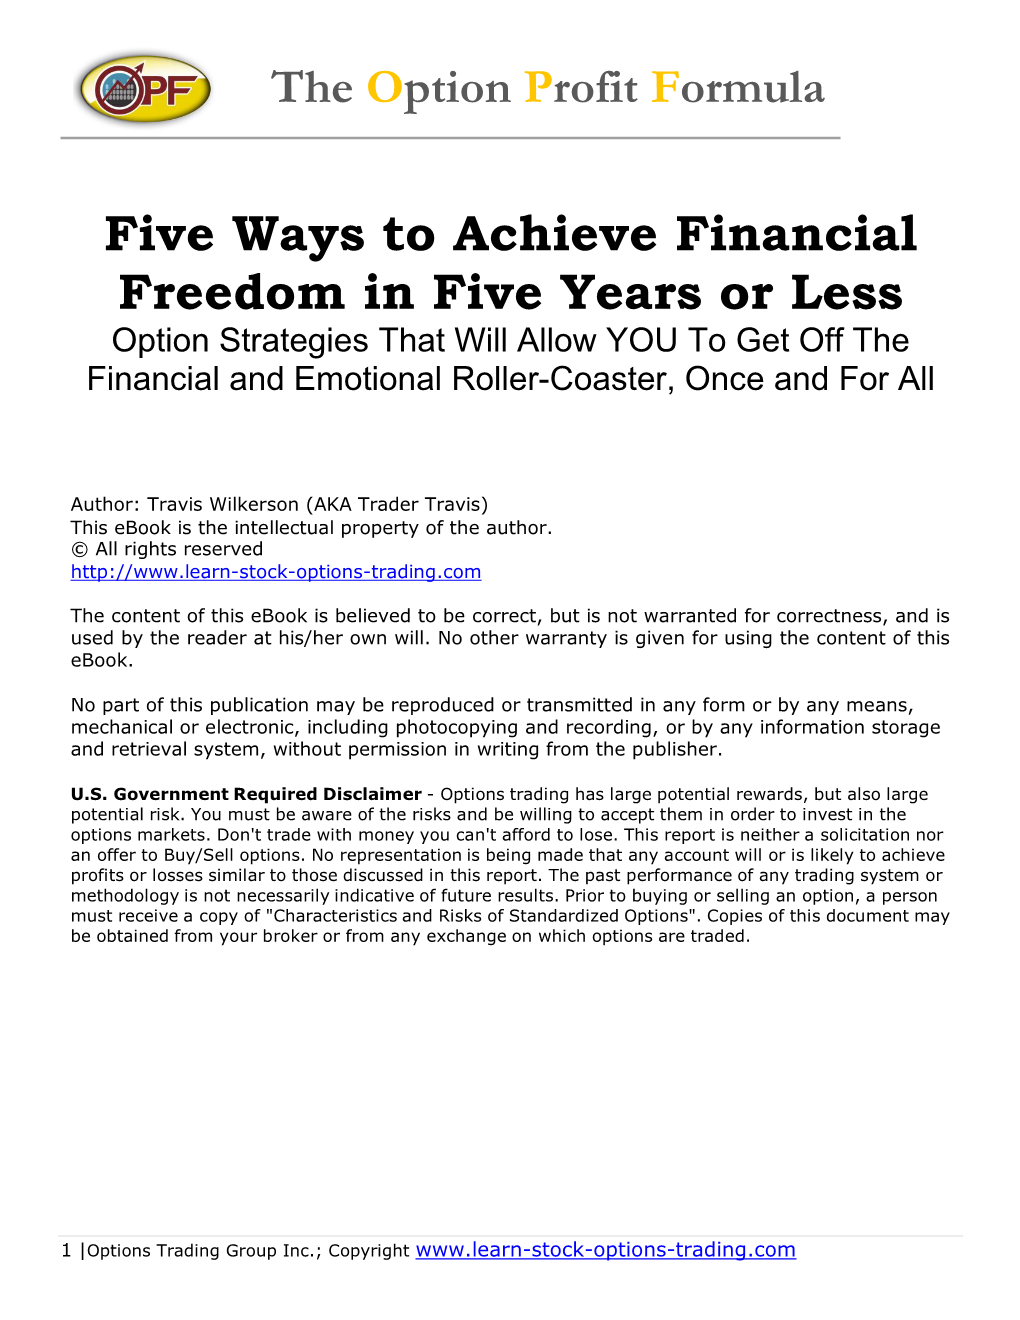 Five Ways to Achieve Financial Freedom in Five Years Or Less